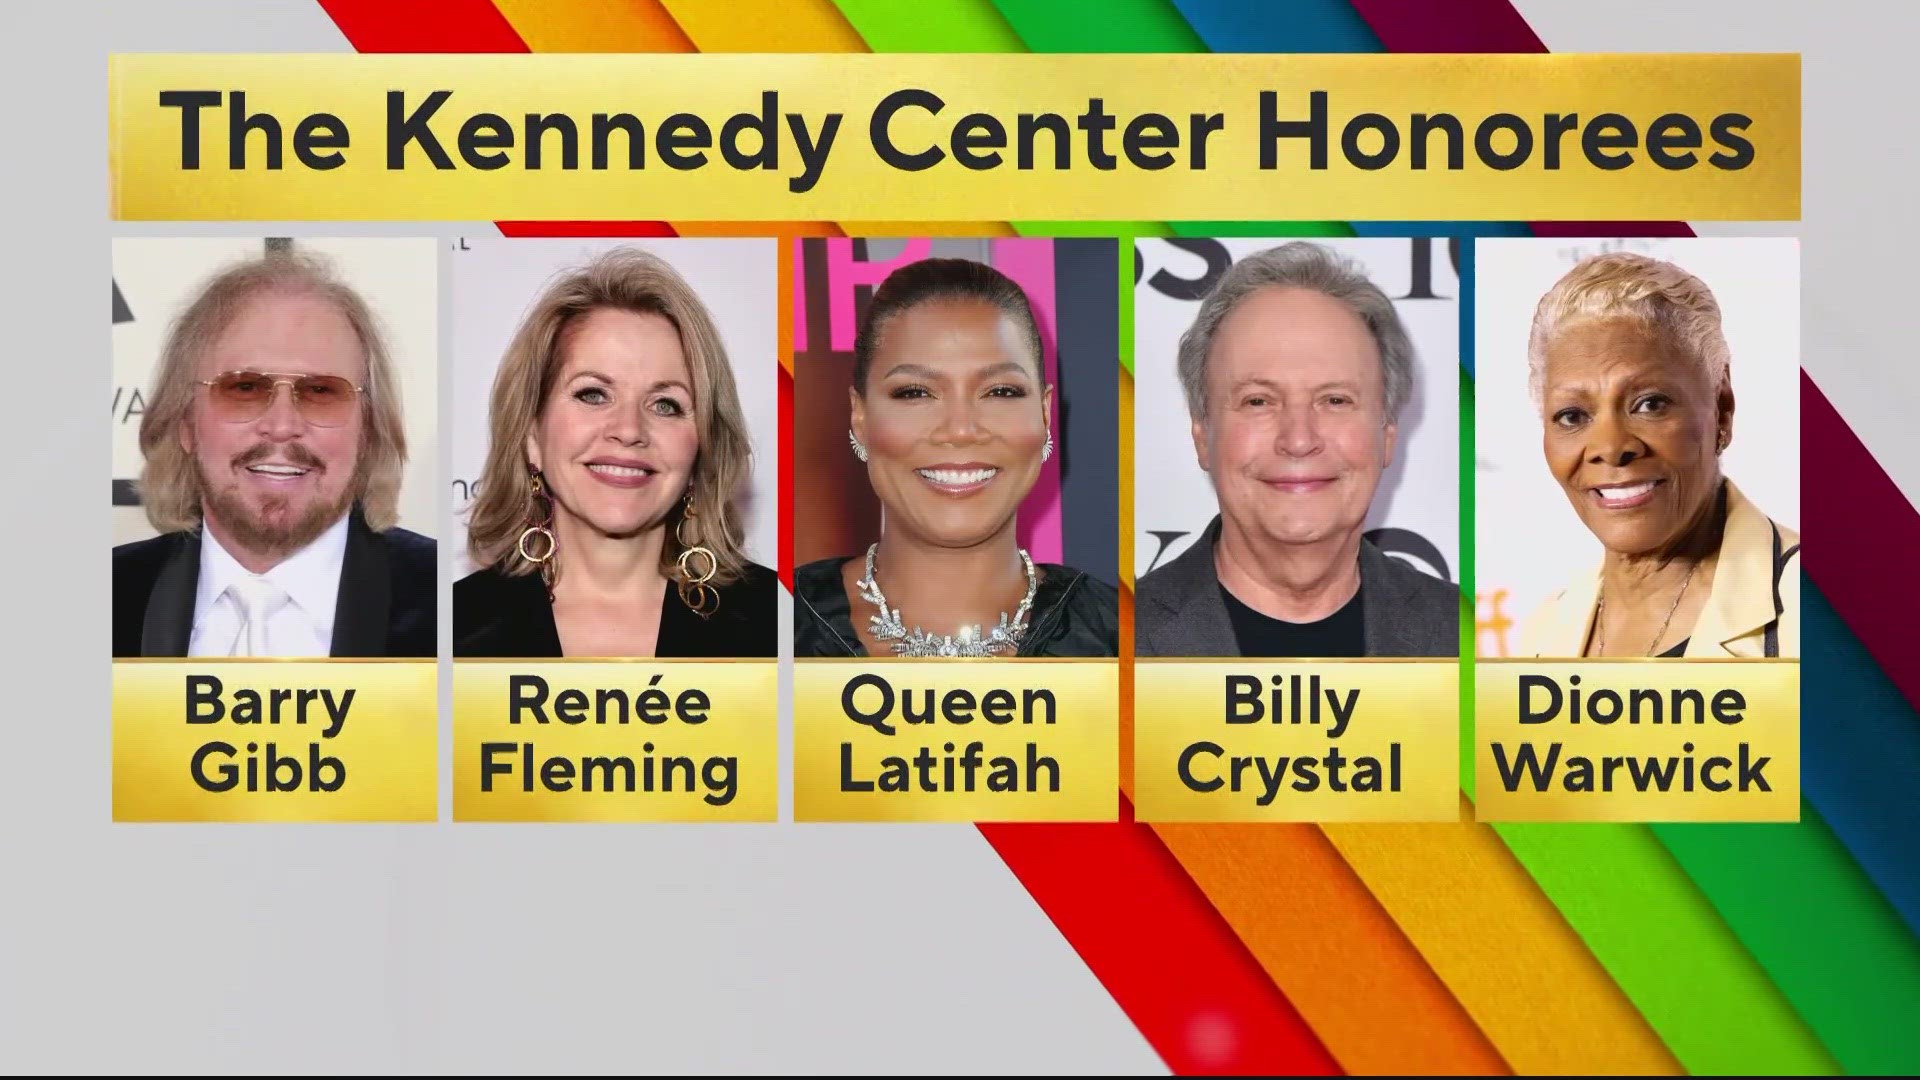 Kennedy Center honorees announced